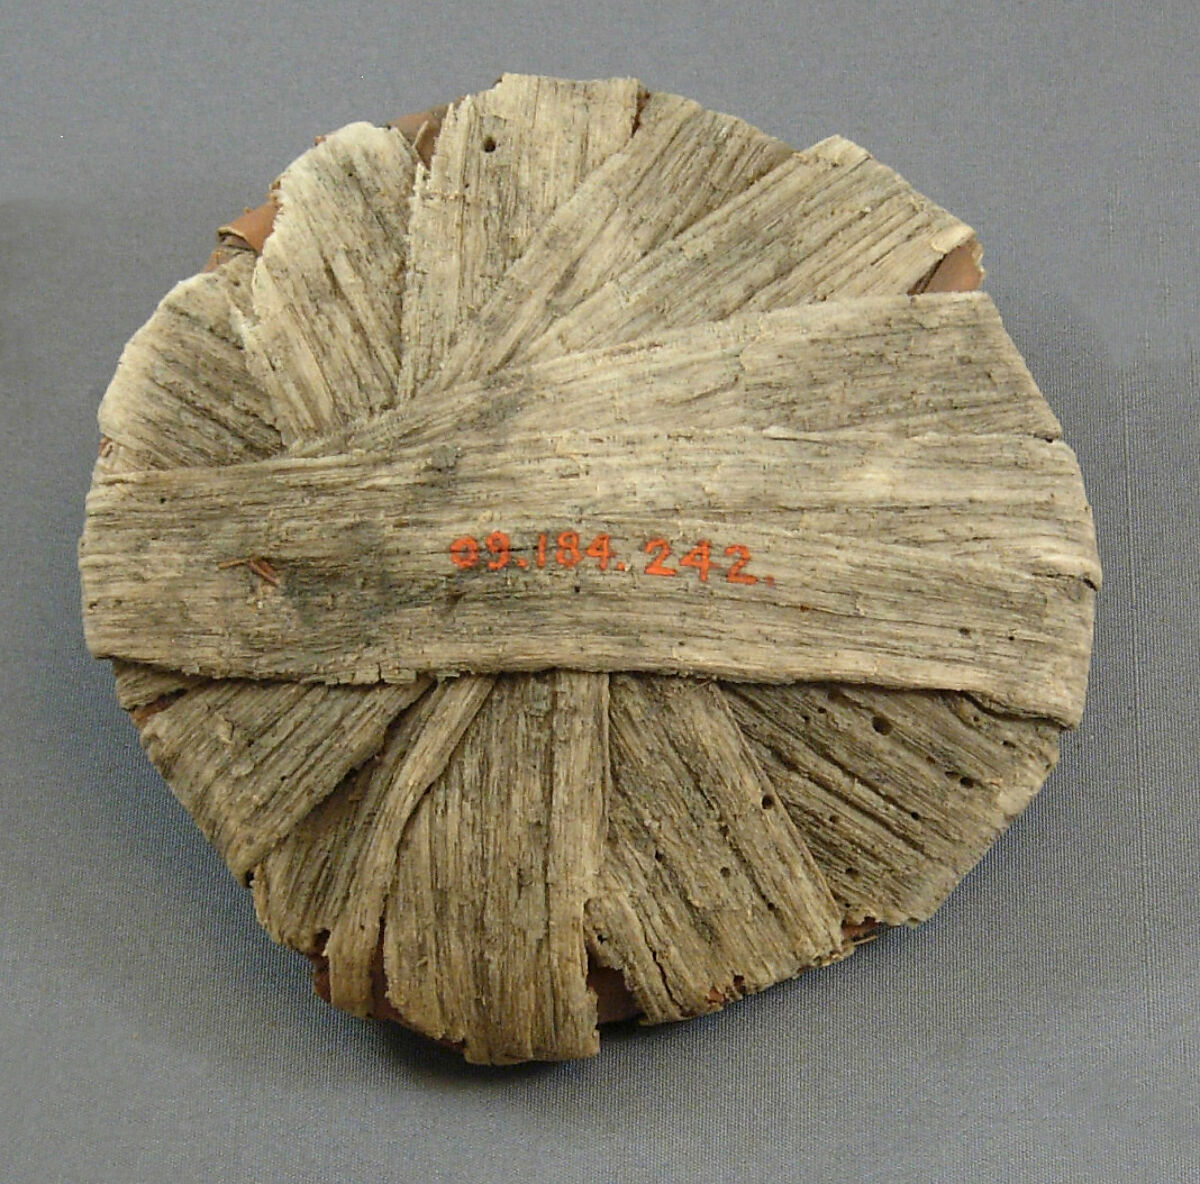 Papyrus Lid from the Embalming Cache of Tutankhamun, Papyrus fiber 